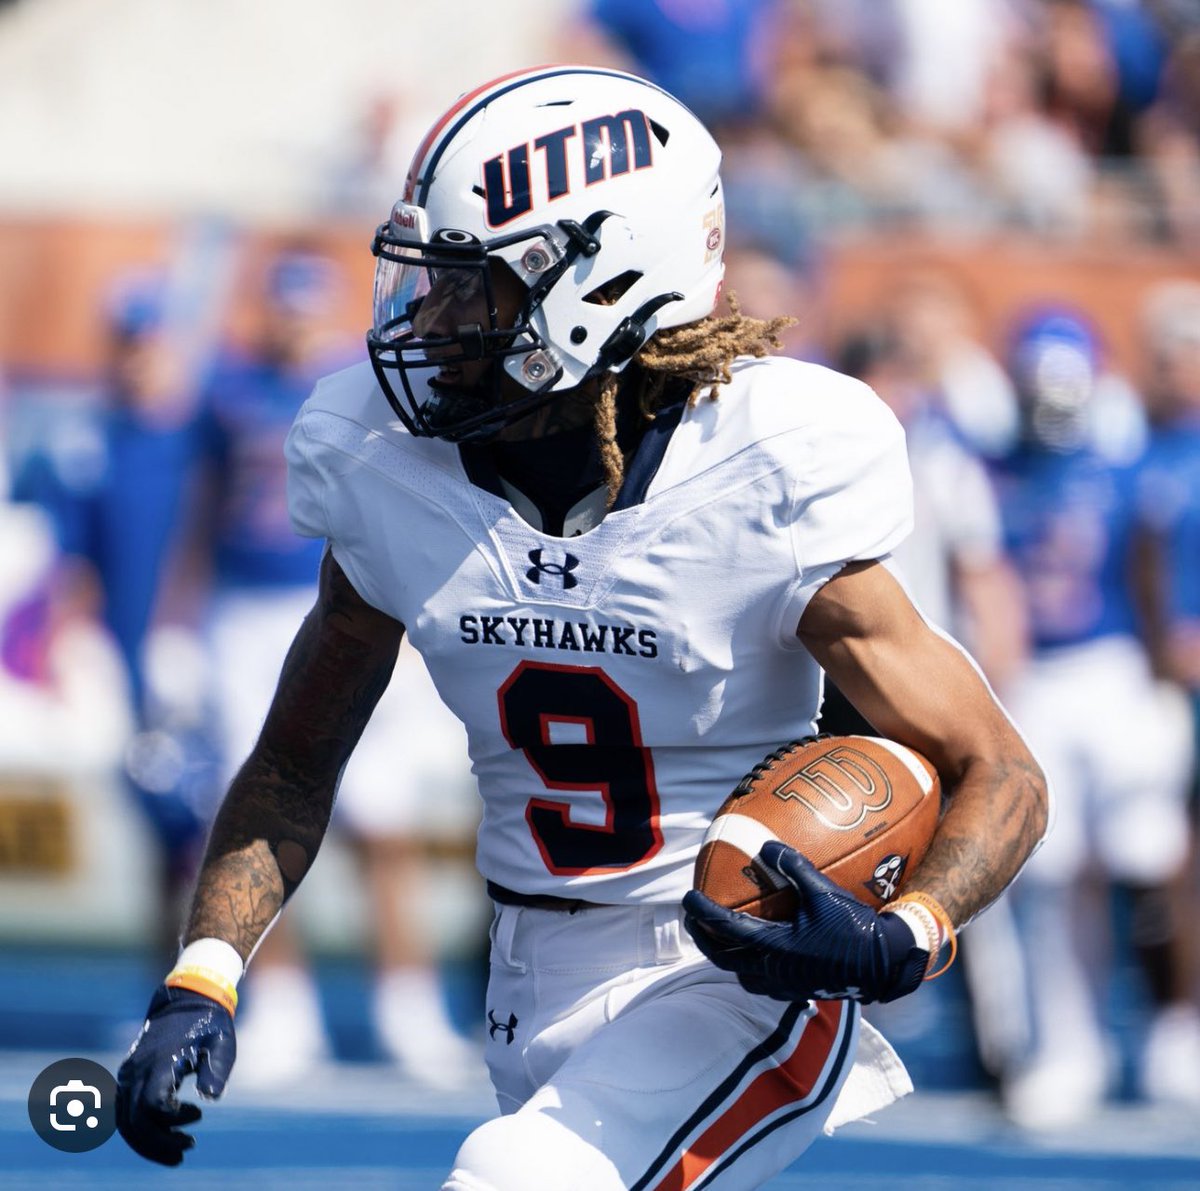 #AGTG After a great conversation with @coachmpetrino I’m blessed to receive an offer to play at @UTM_FOOTBALL @LrMillsFootball @coachghunter @Coachbillylee @MarcusBolden18 @JtheNupe @PrepRedzoneAR @ArRecruitingGuy @NaturalStateFB